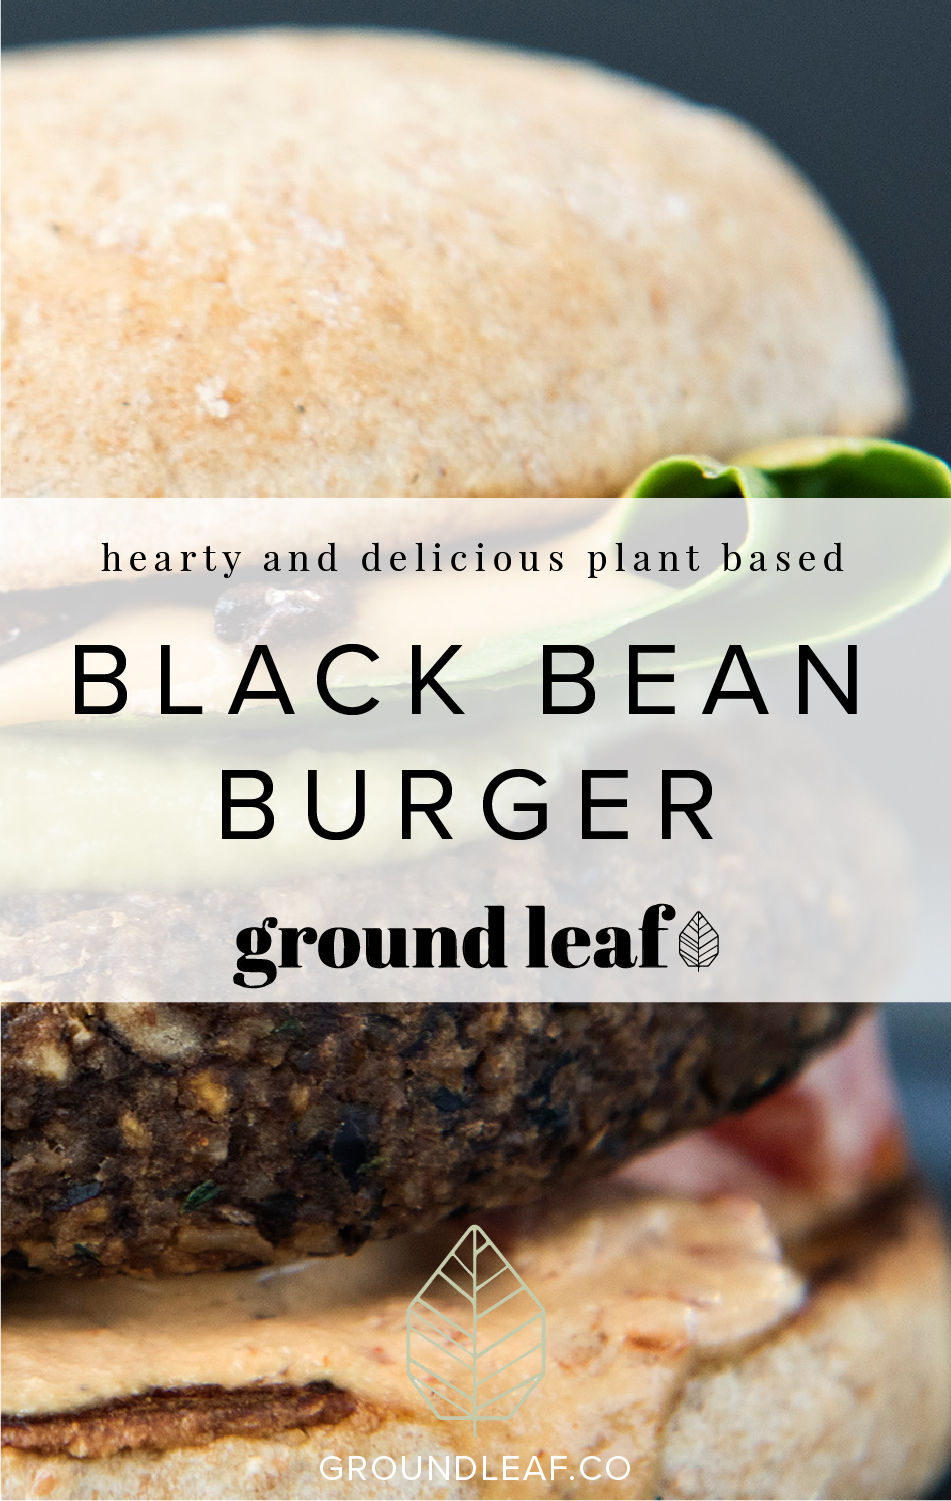 Recipe for a hearty vegan black bean burger. Video recipe included. | Groundleaf.co